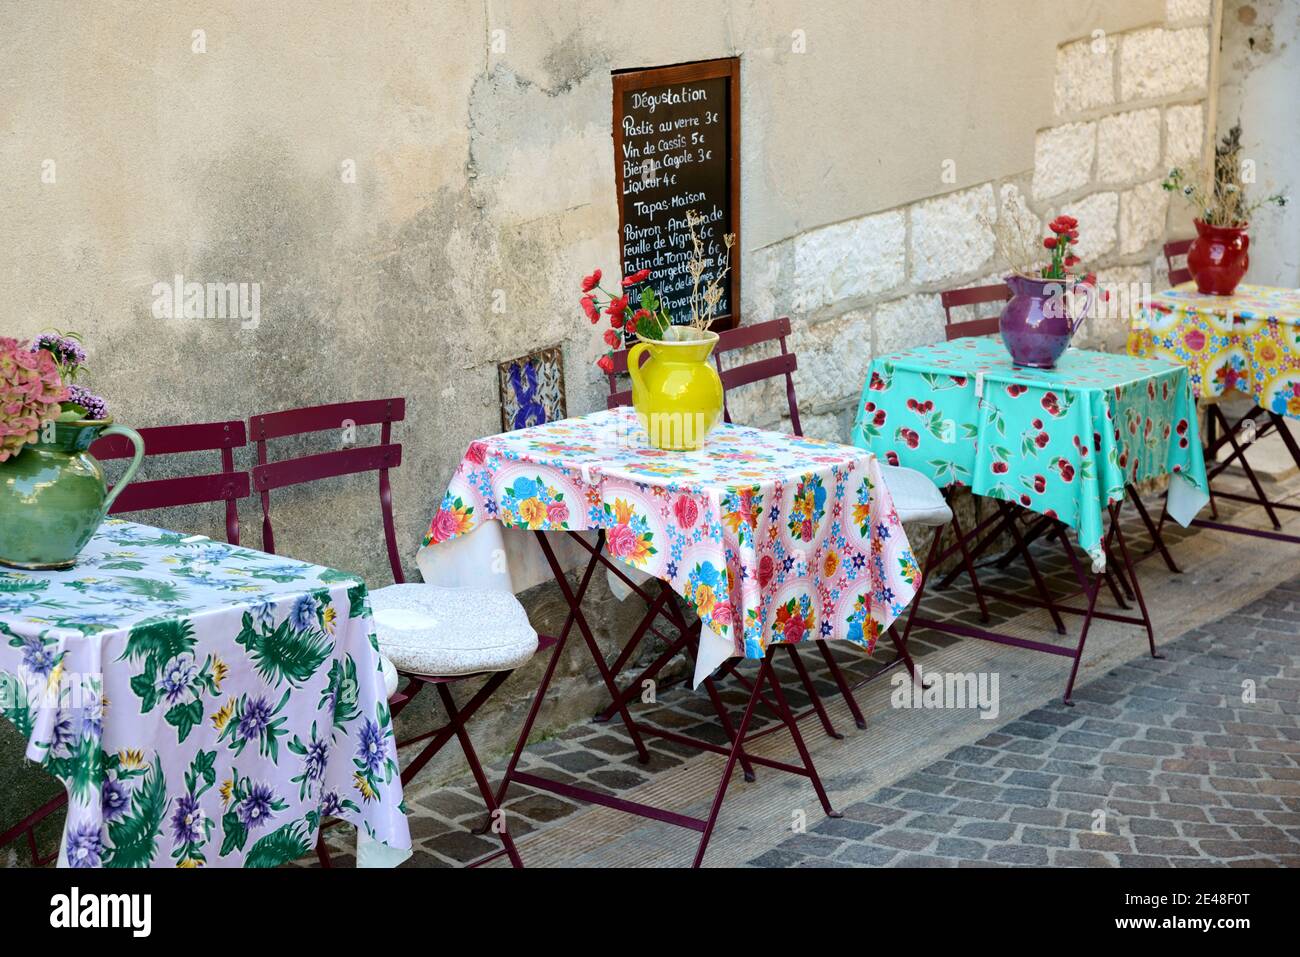 Outdoor Restaurant with Tables Prepared with Provençal Tablecloths Decorative Jugs Vases & Flowers in Cassis Provence France Stock Photo